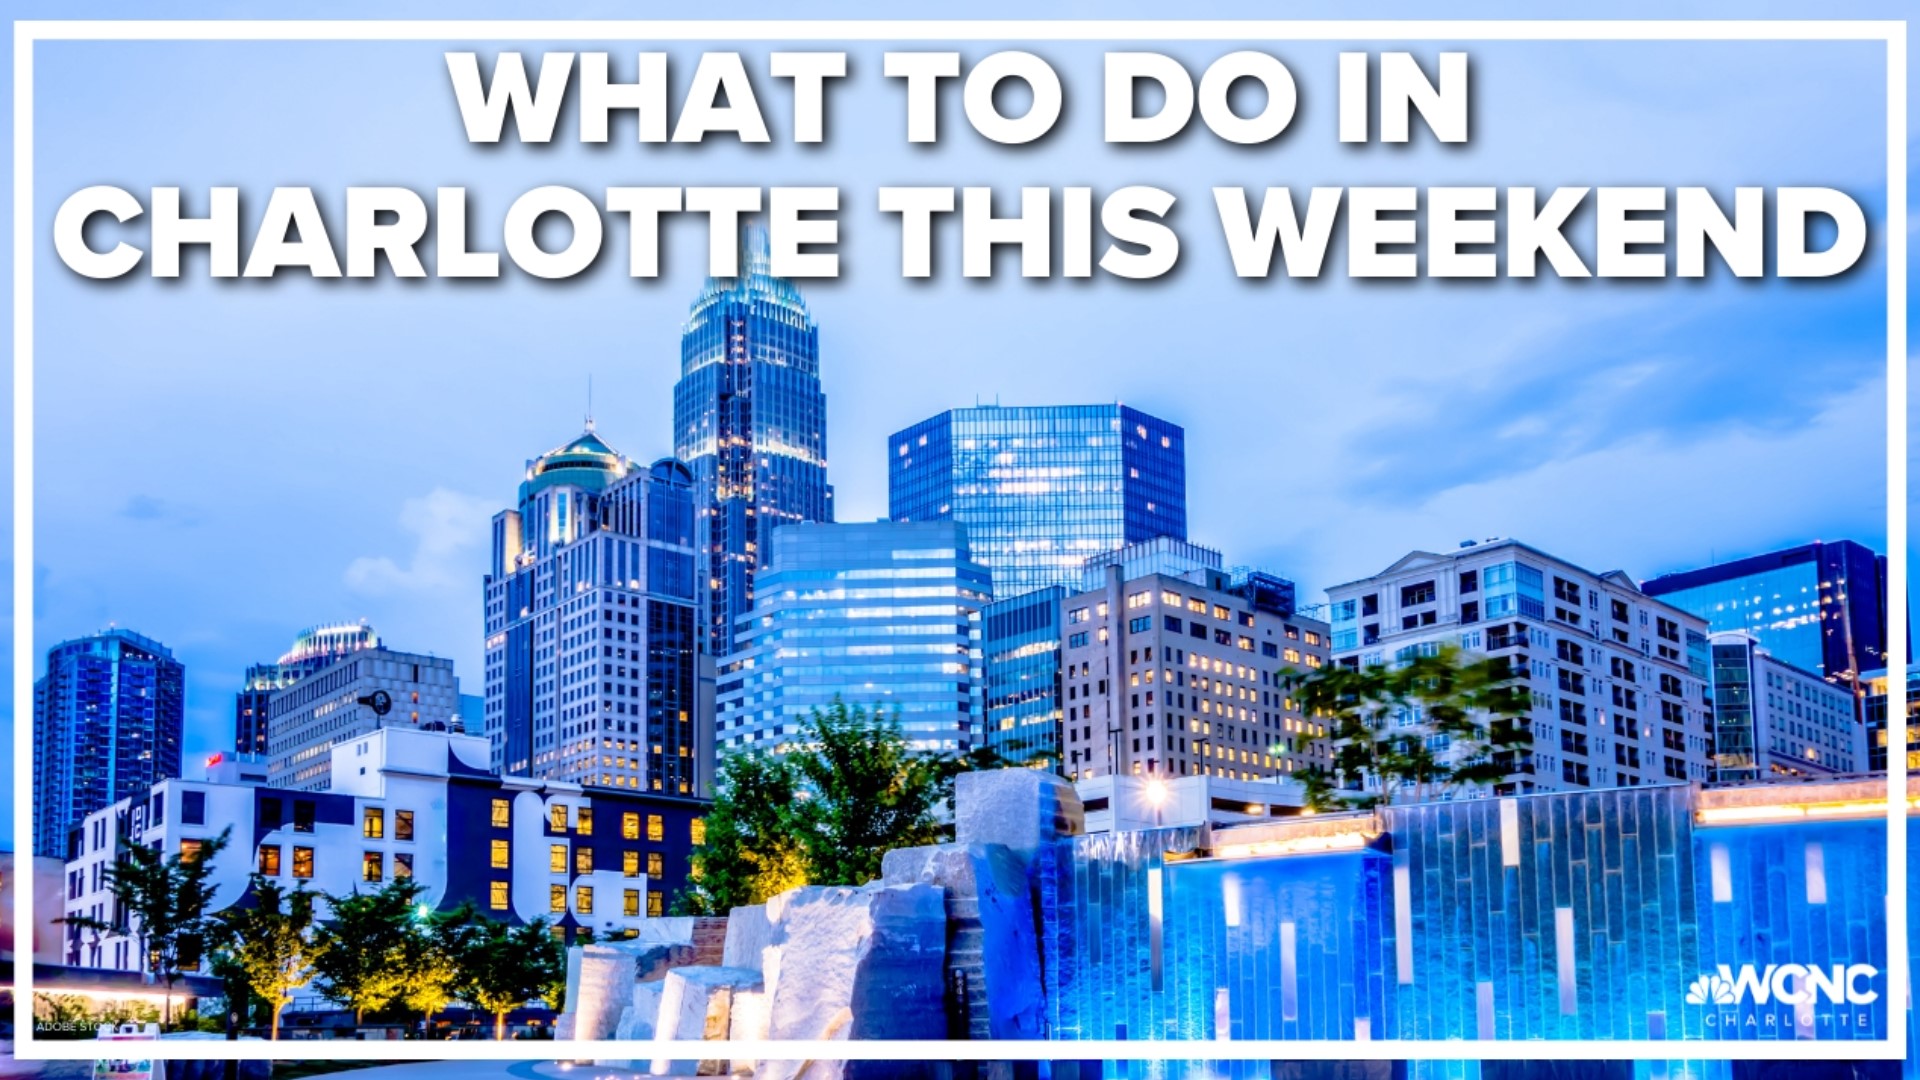 Brittany Van Voorhees takes a closer look at events going on in the Charlotte area this weekend.